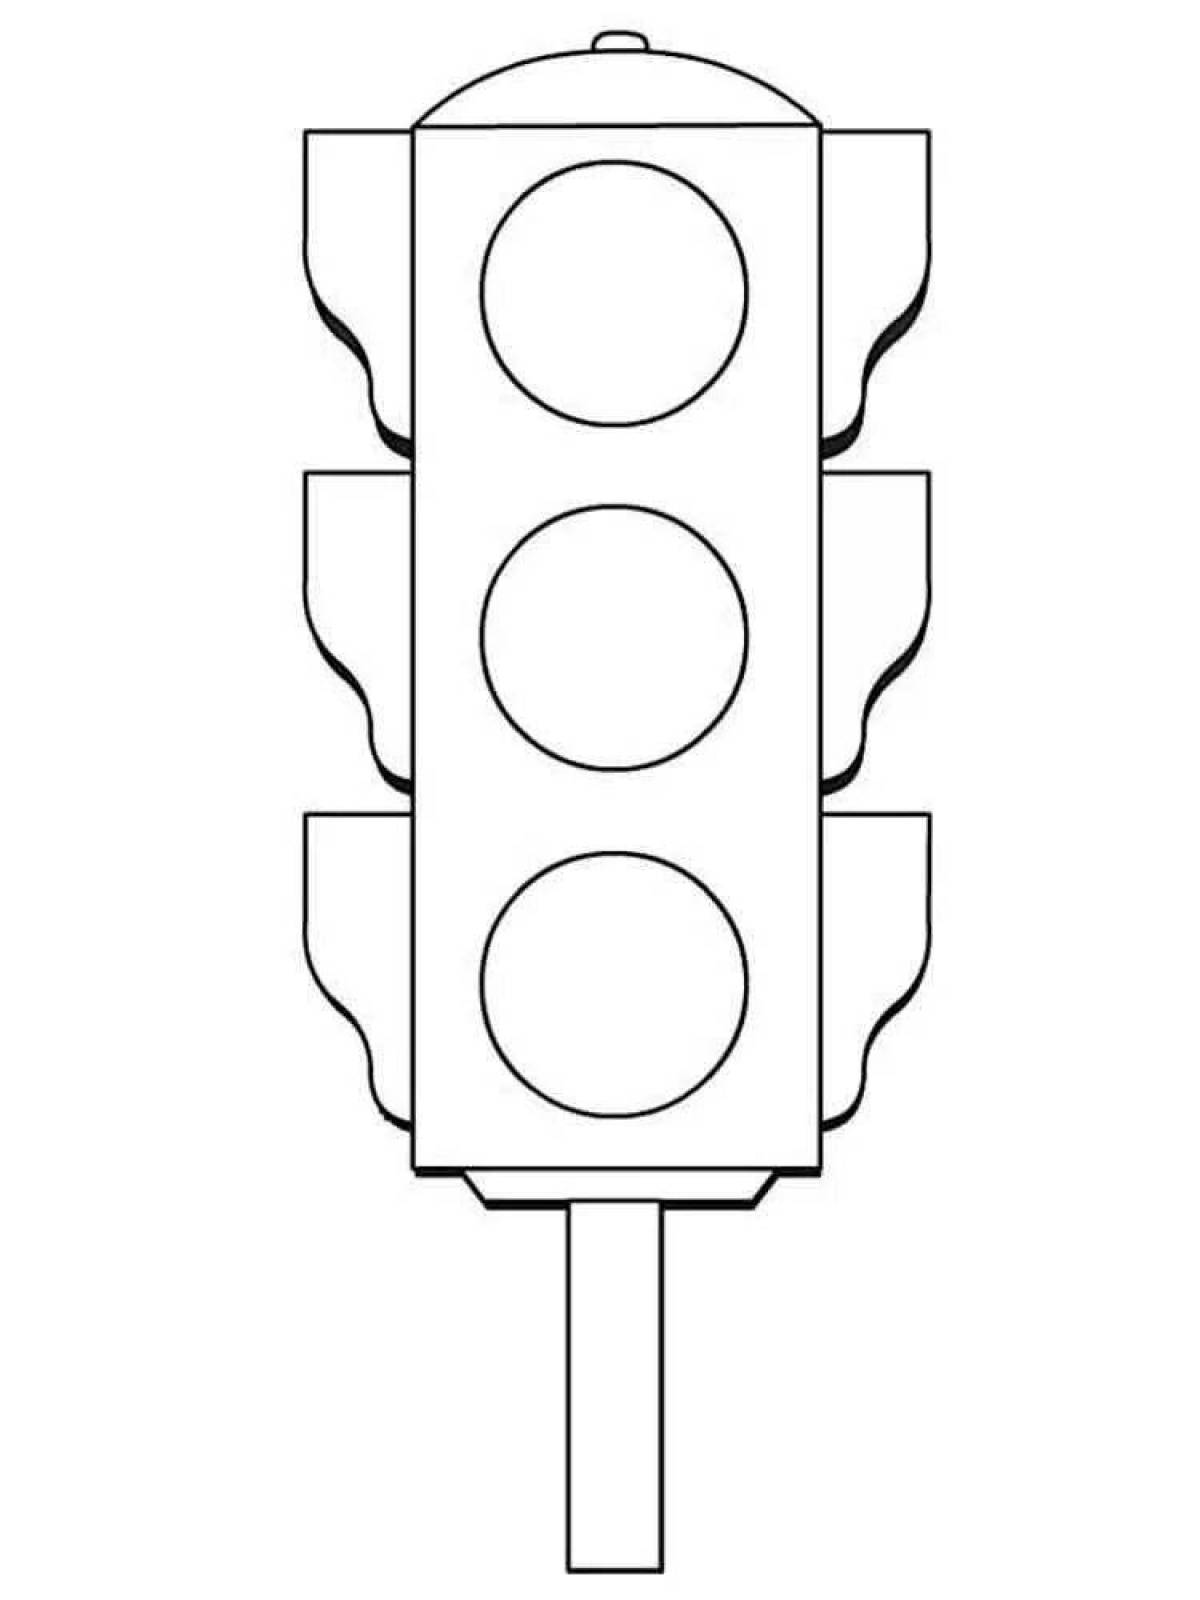 Traffic light picture for kids #3